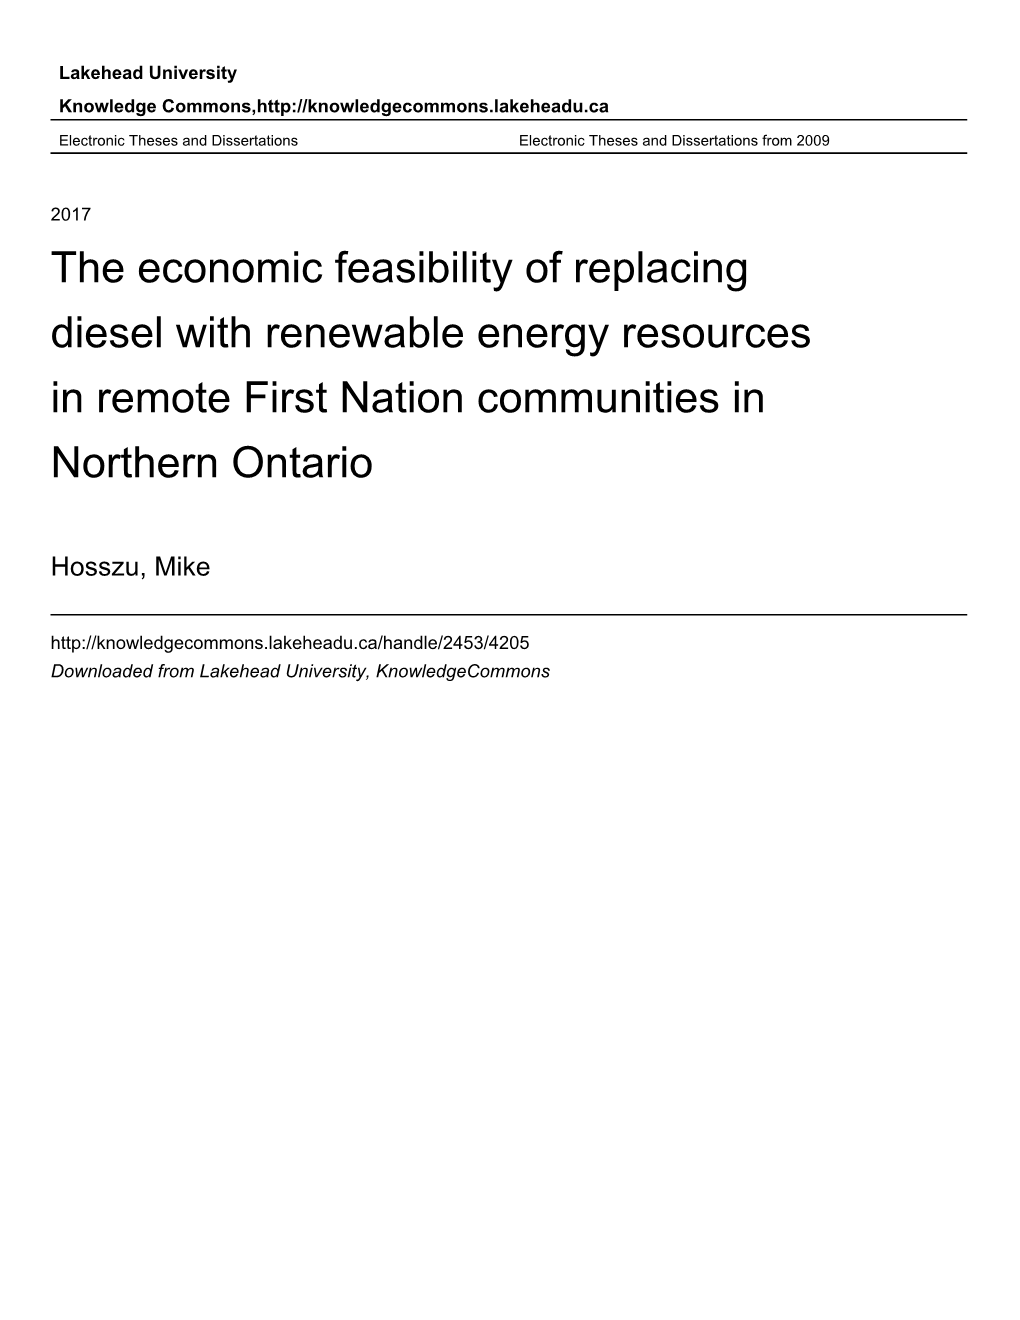 The Economic Feasibility of Replacing Diesel with Renewable Energy Resources in Remote First Nation Communities in Northern Ontario